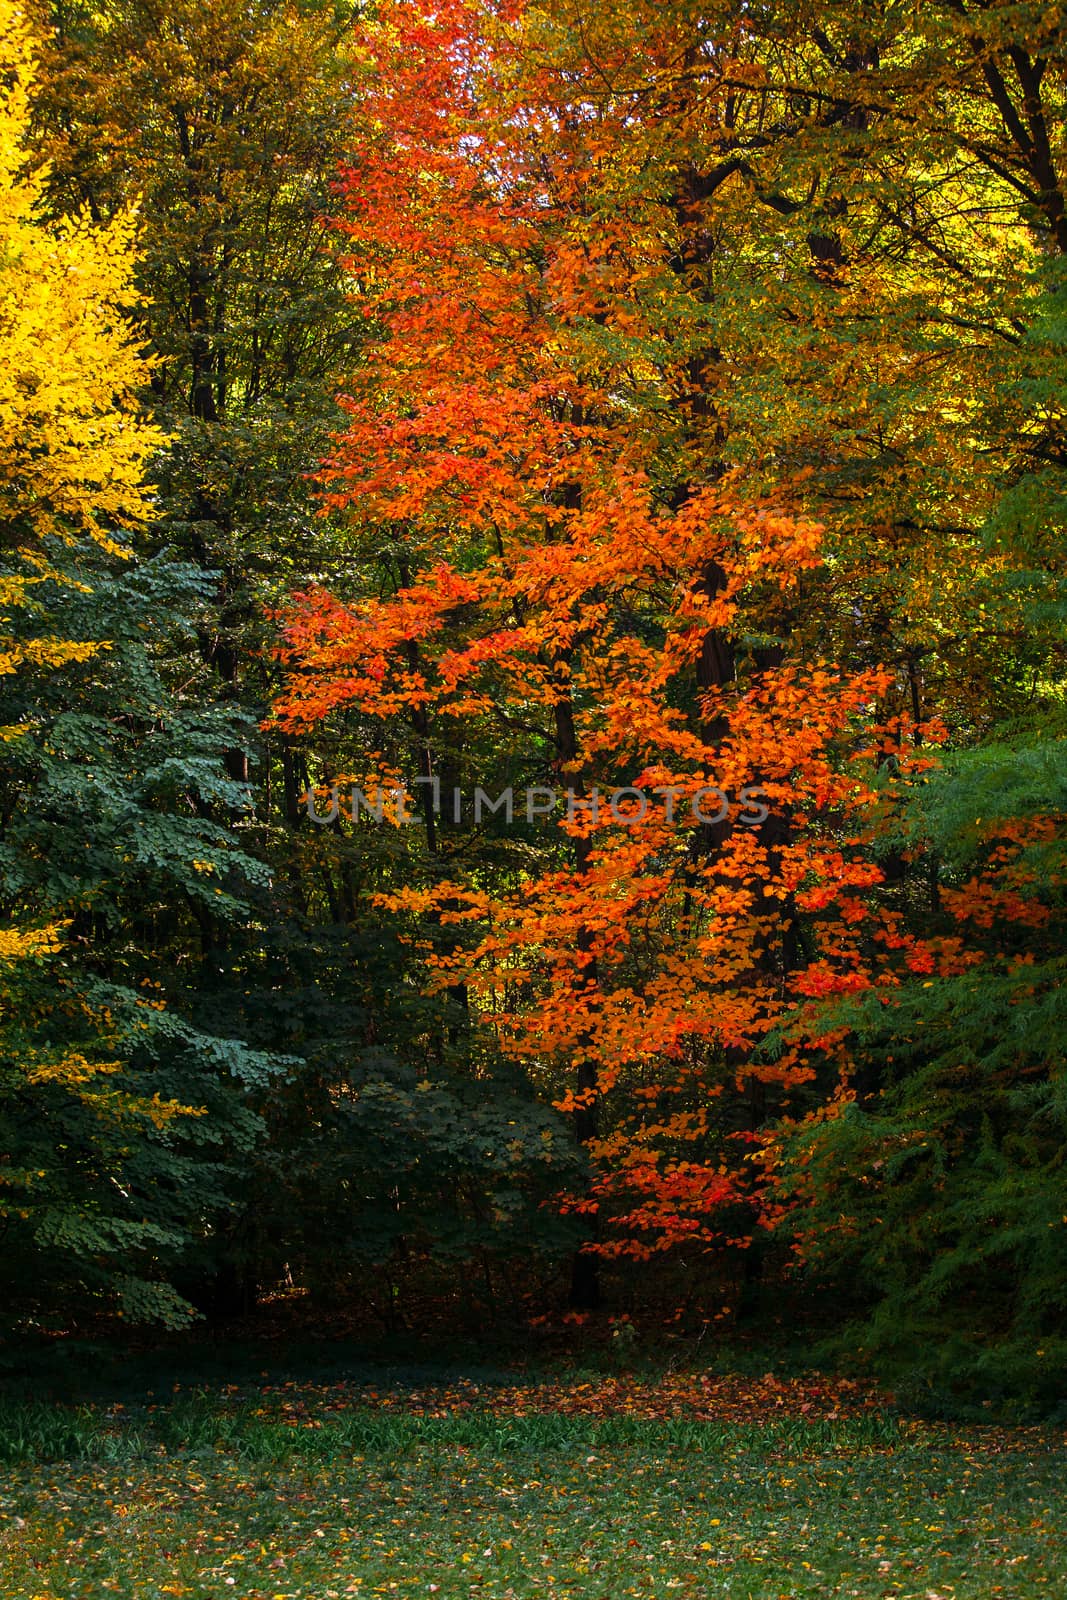 Autumn tree with a red leaf on among green trees by Opikanets